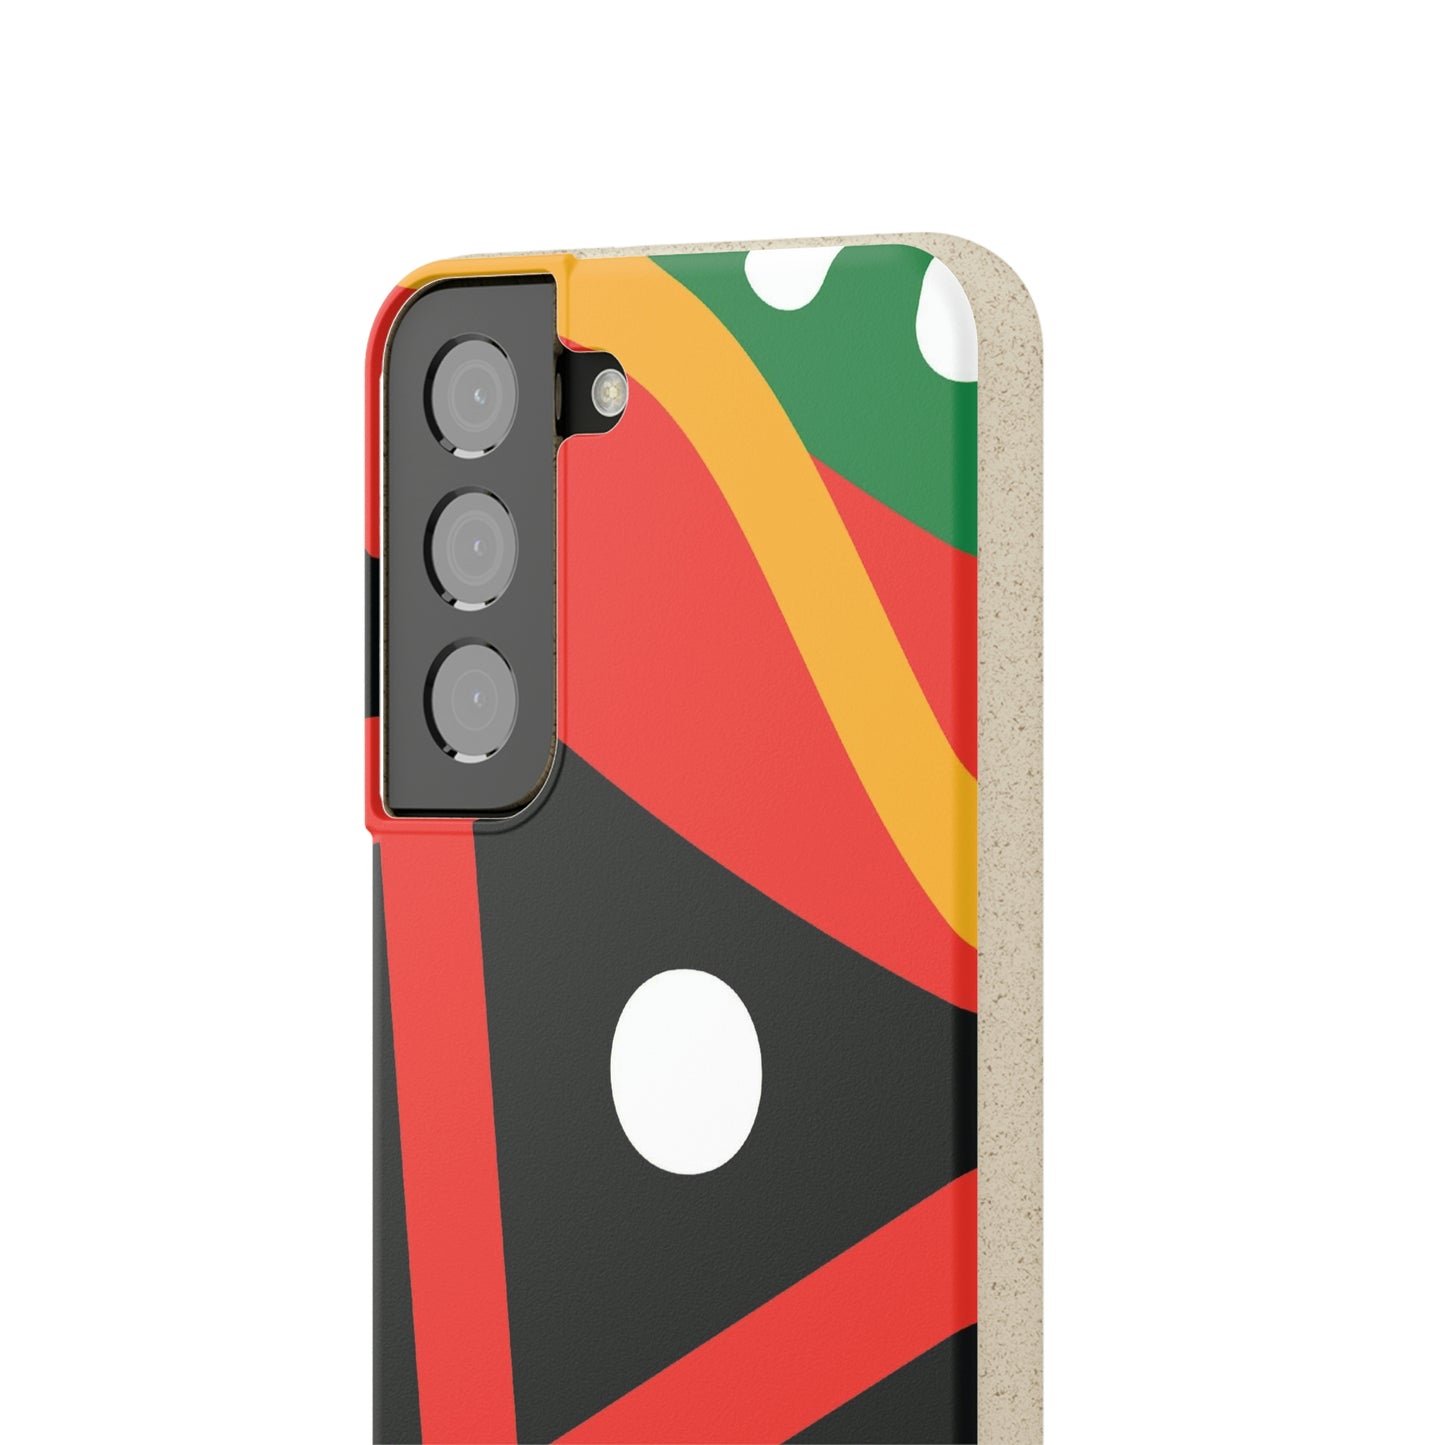 Afrocentric Eco-Friendly Biodegradable Phone Case: Protect Your Device & the Planet"